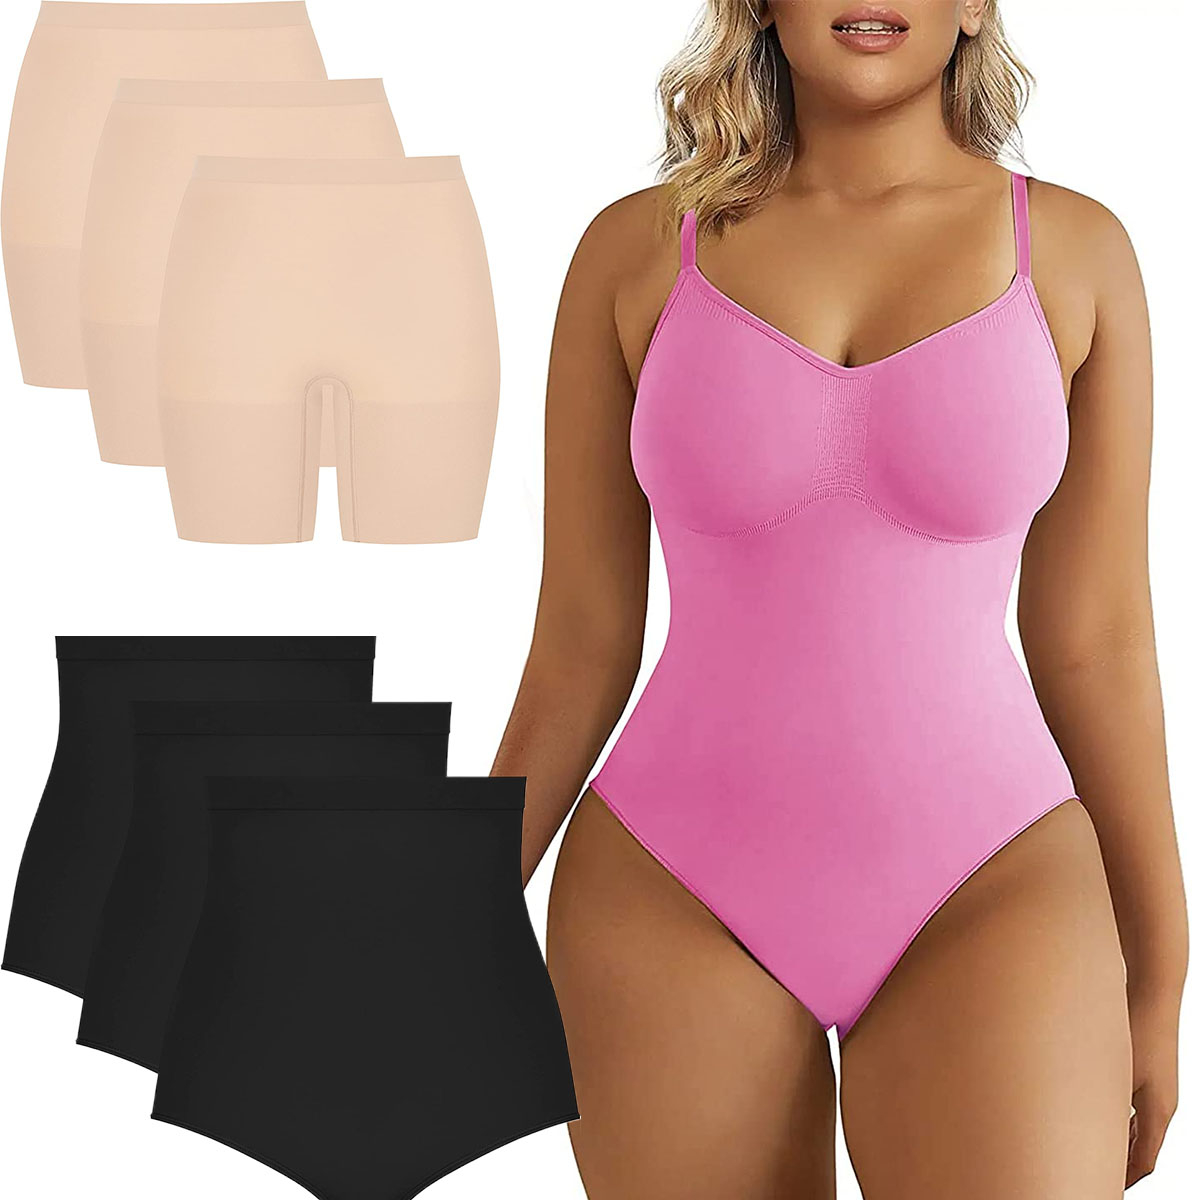 Shape wear bodysuits? 👀 added these to my st0re frønt under the